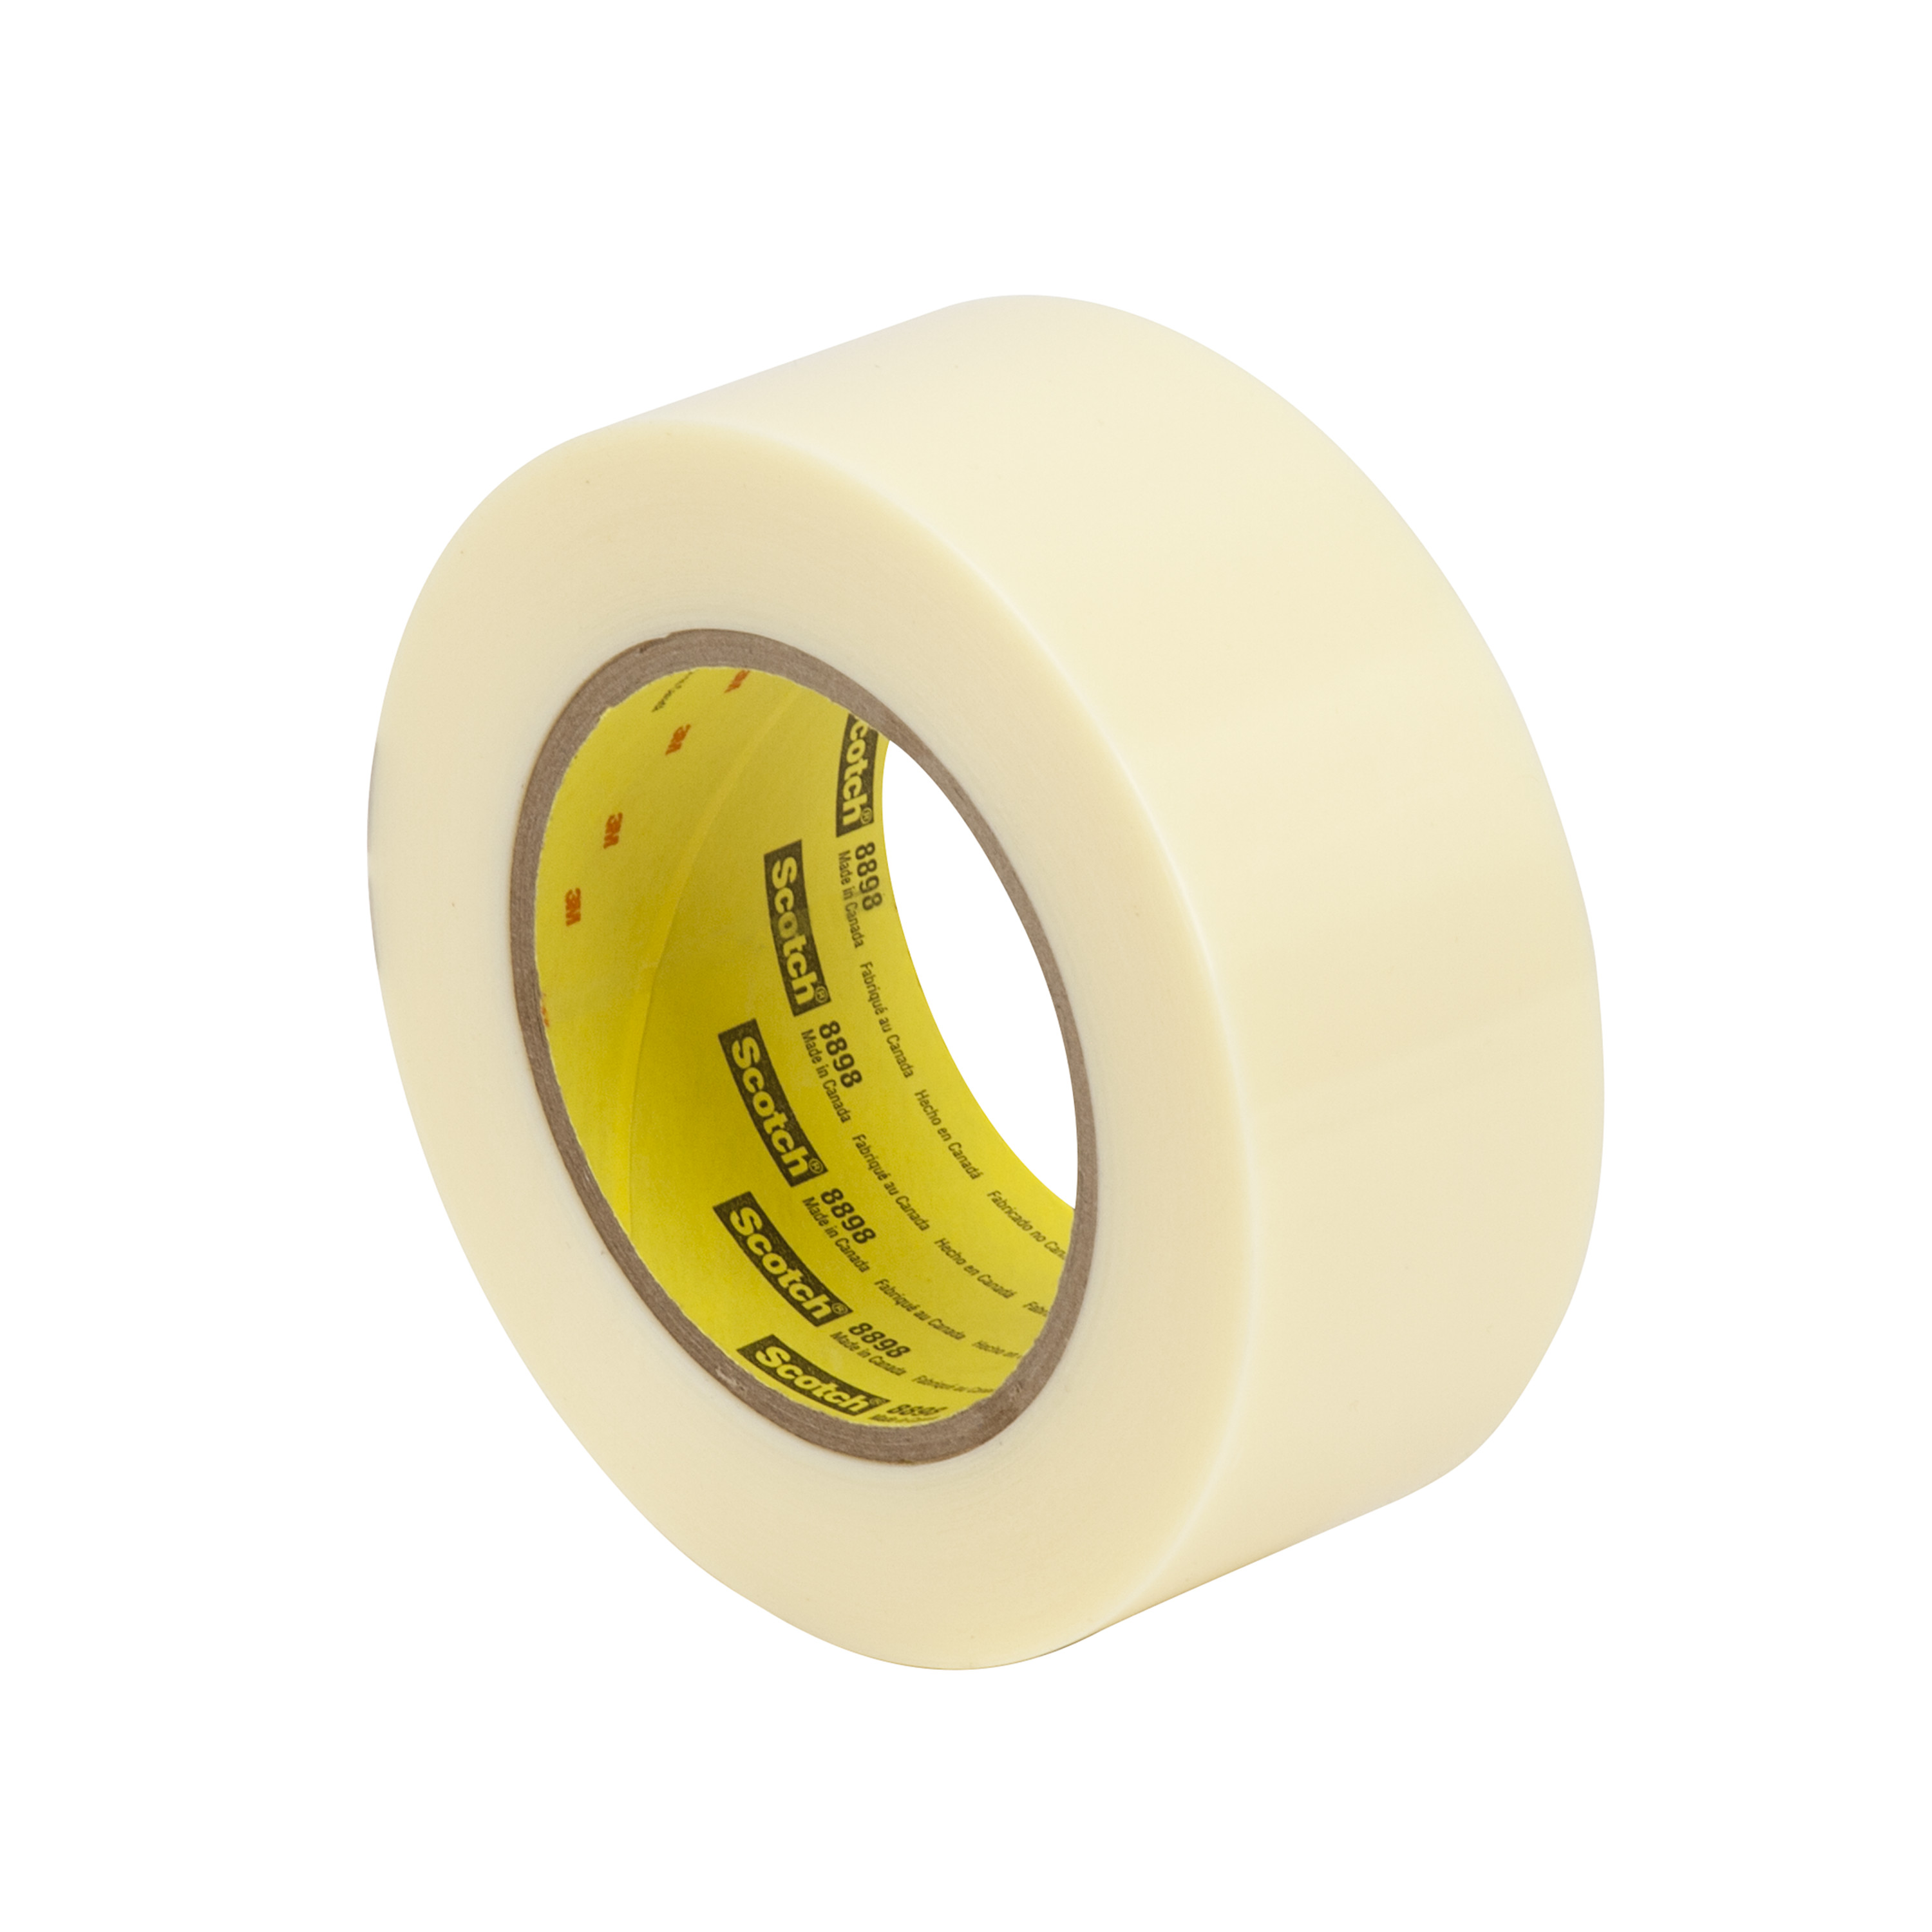 Scotch® Strapping Tape 8898, Ivory, 48 mm x 330 m, 4.6 mil, 6 rolls per
case